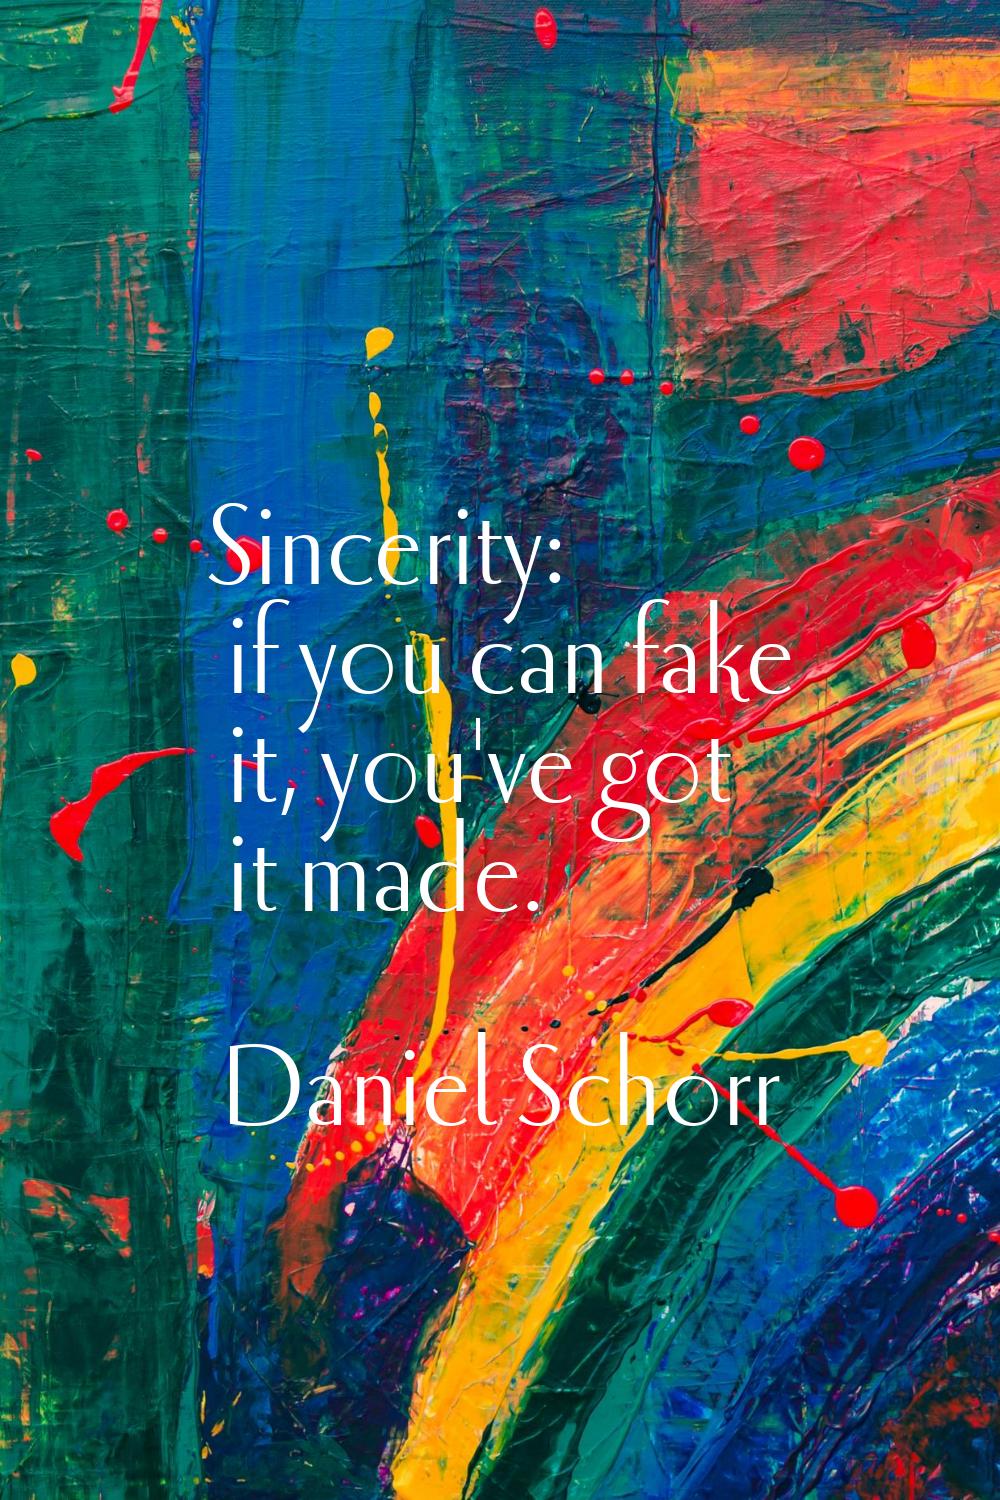 Sincerity: if you can fake it, you've got it made.